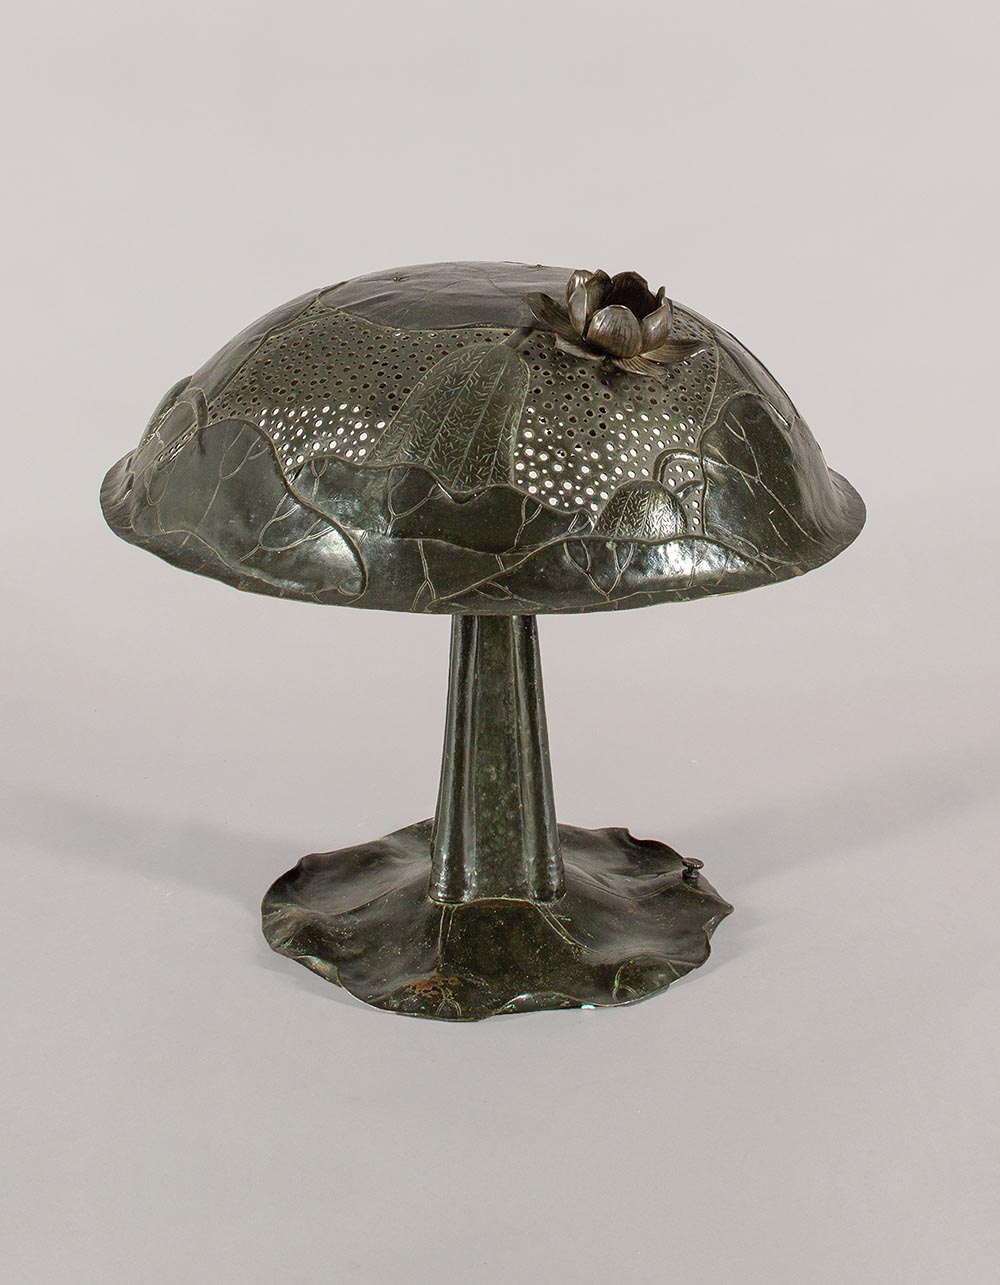 Fig. 2 - Elizabeth Eaton Burton, Lamp with lily pads, c. 1904-1910, patinated copper, TRRF Collection.